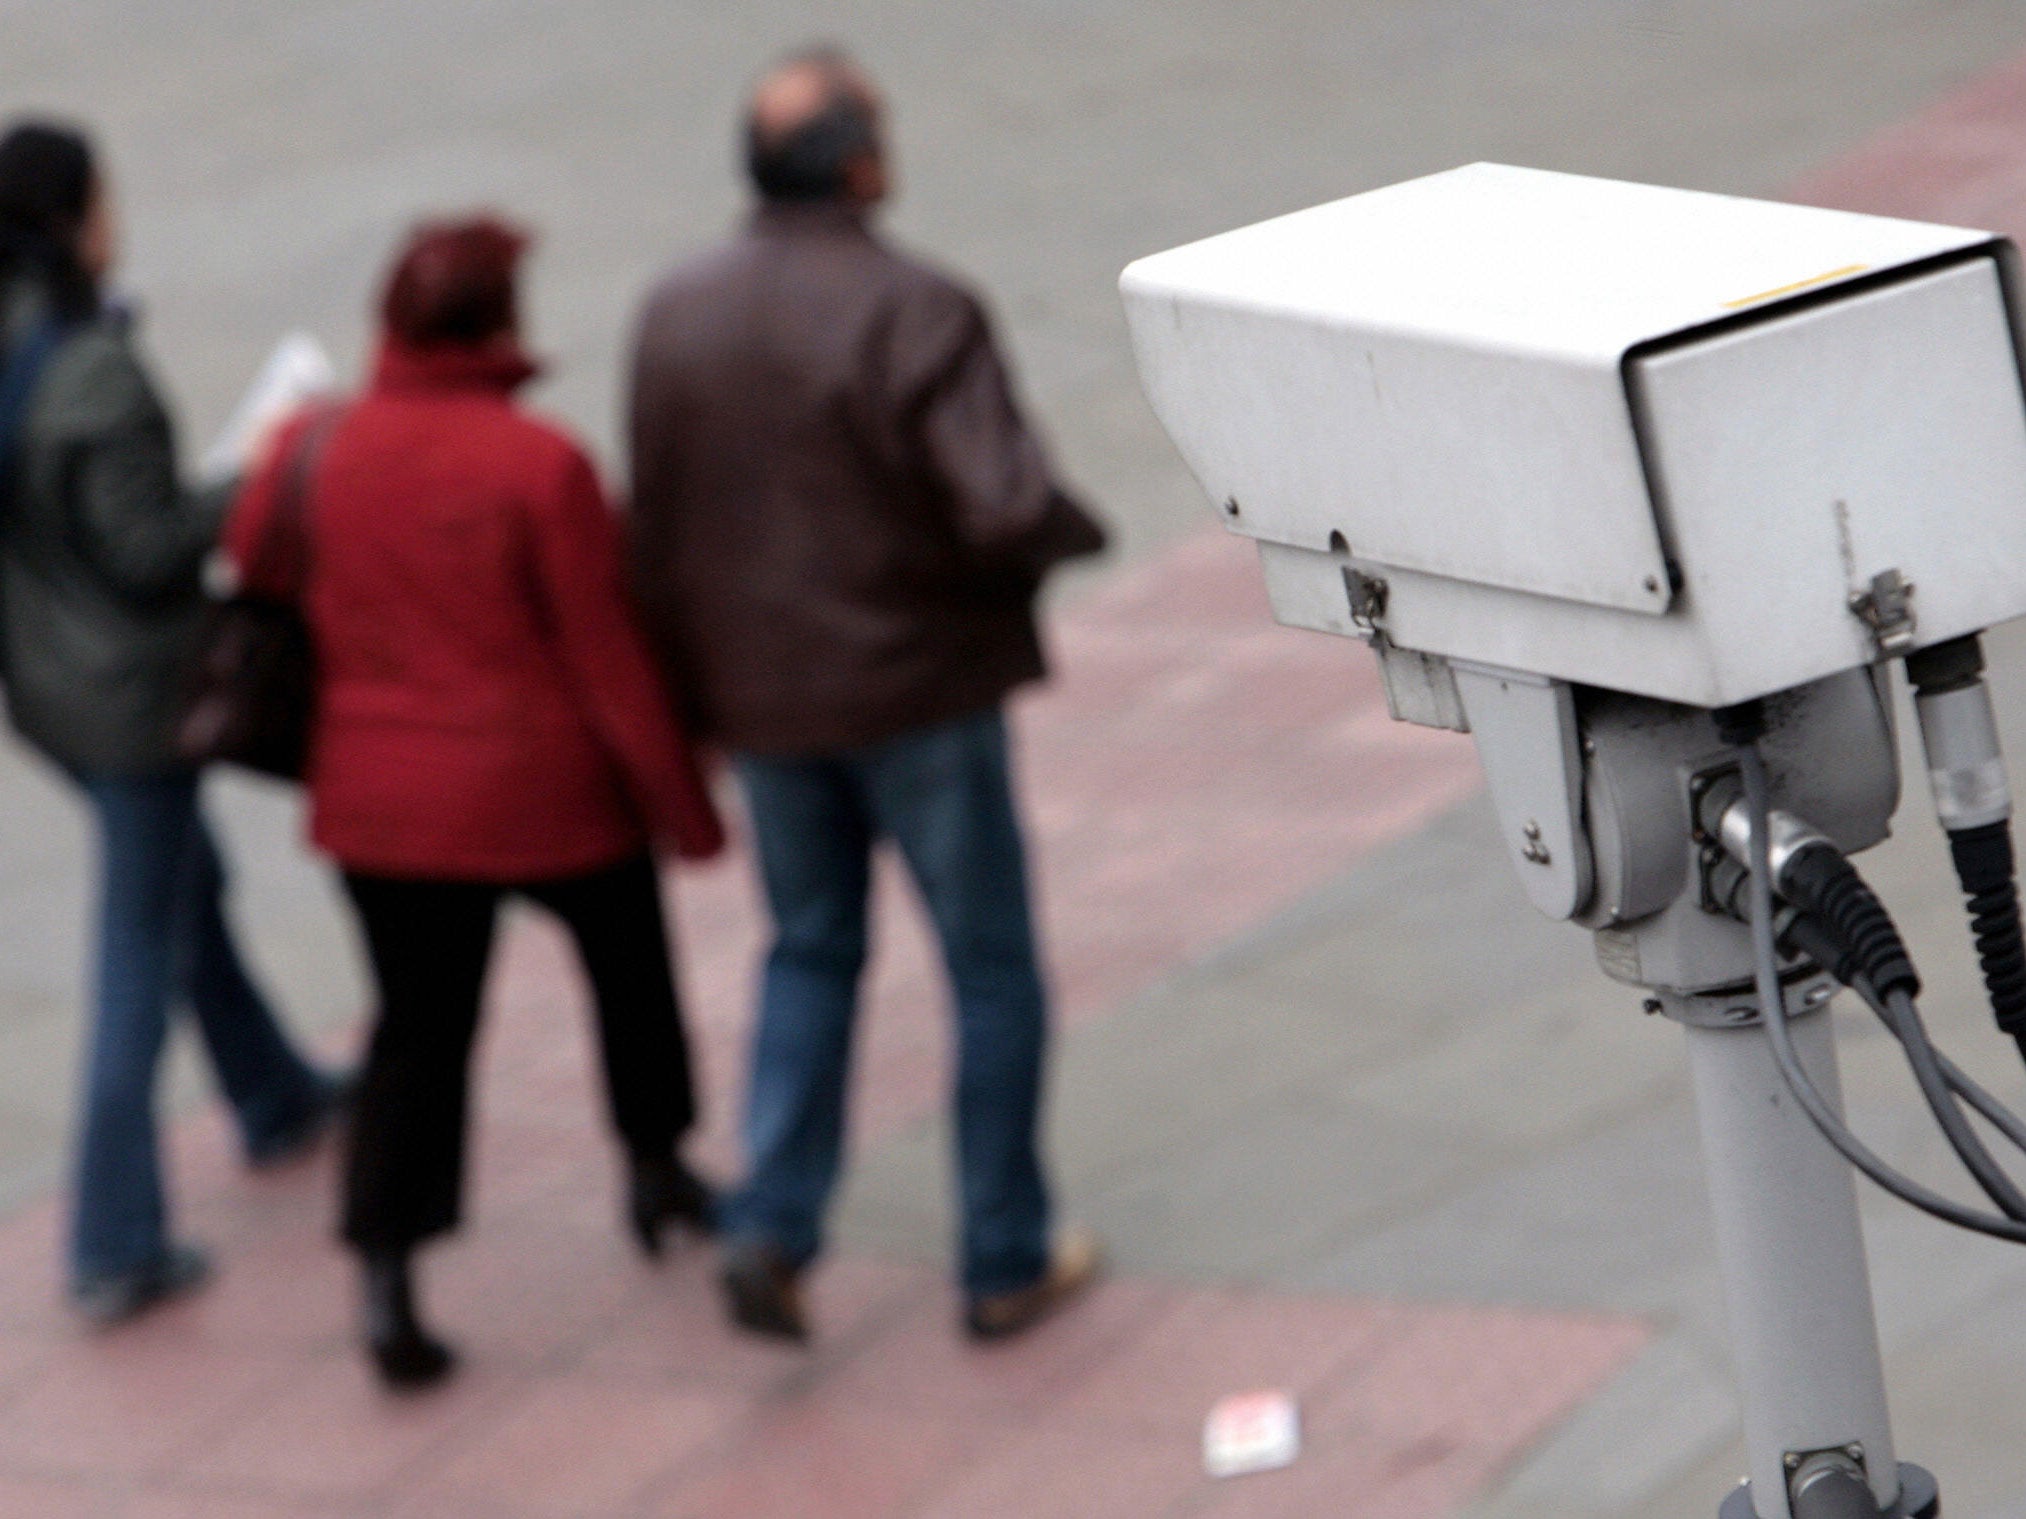 Prevent has funded CCTC cameras located in Muslim areas of cities